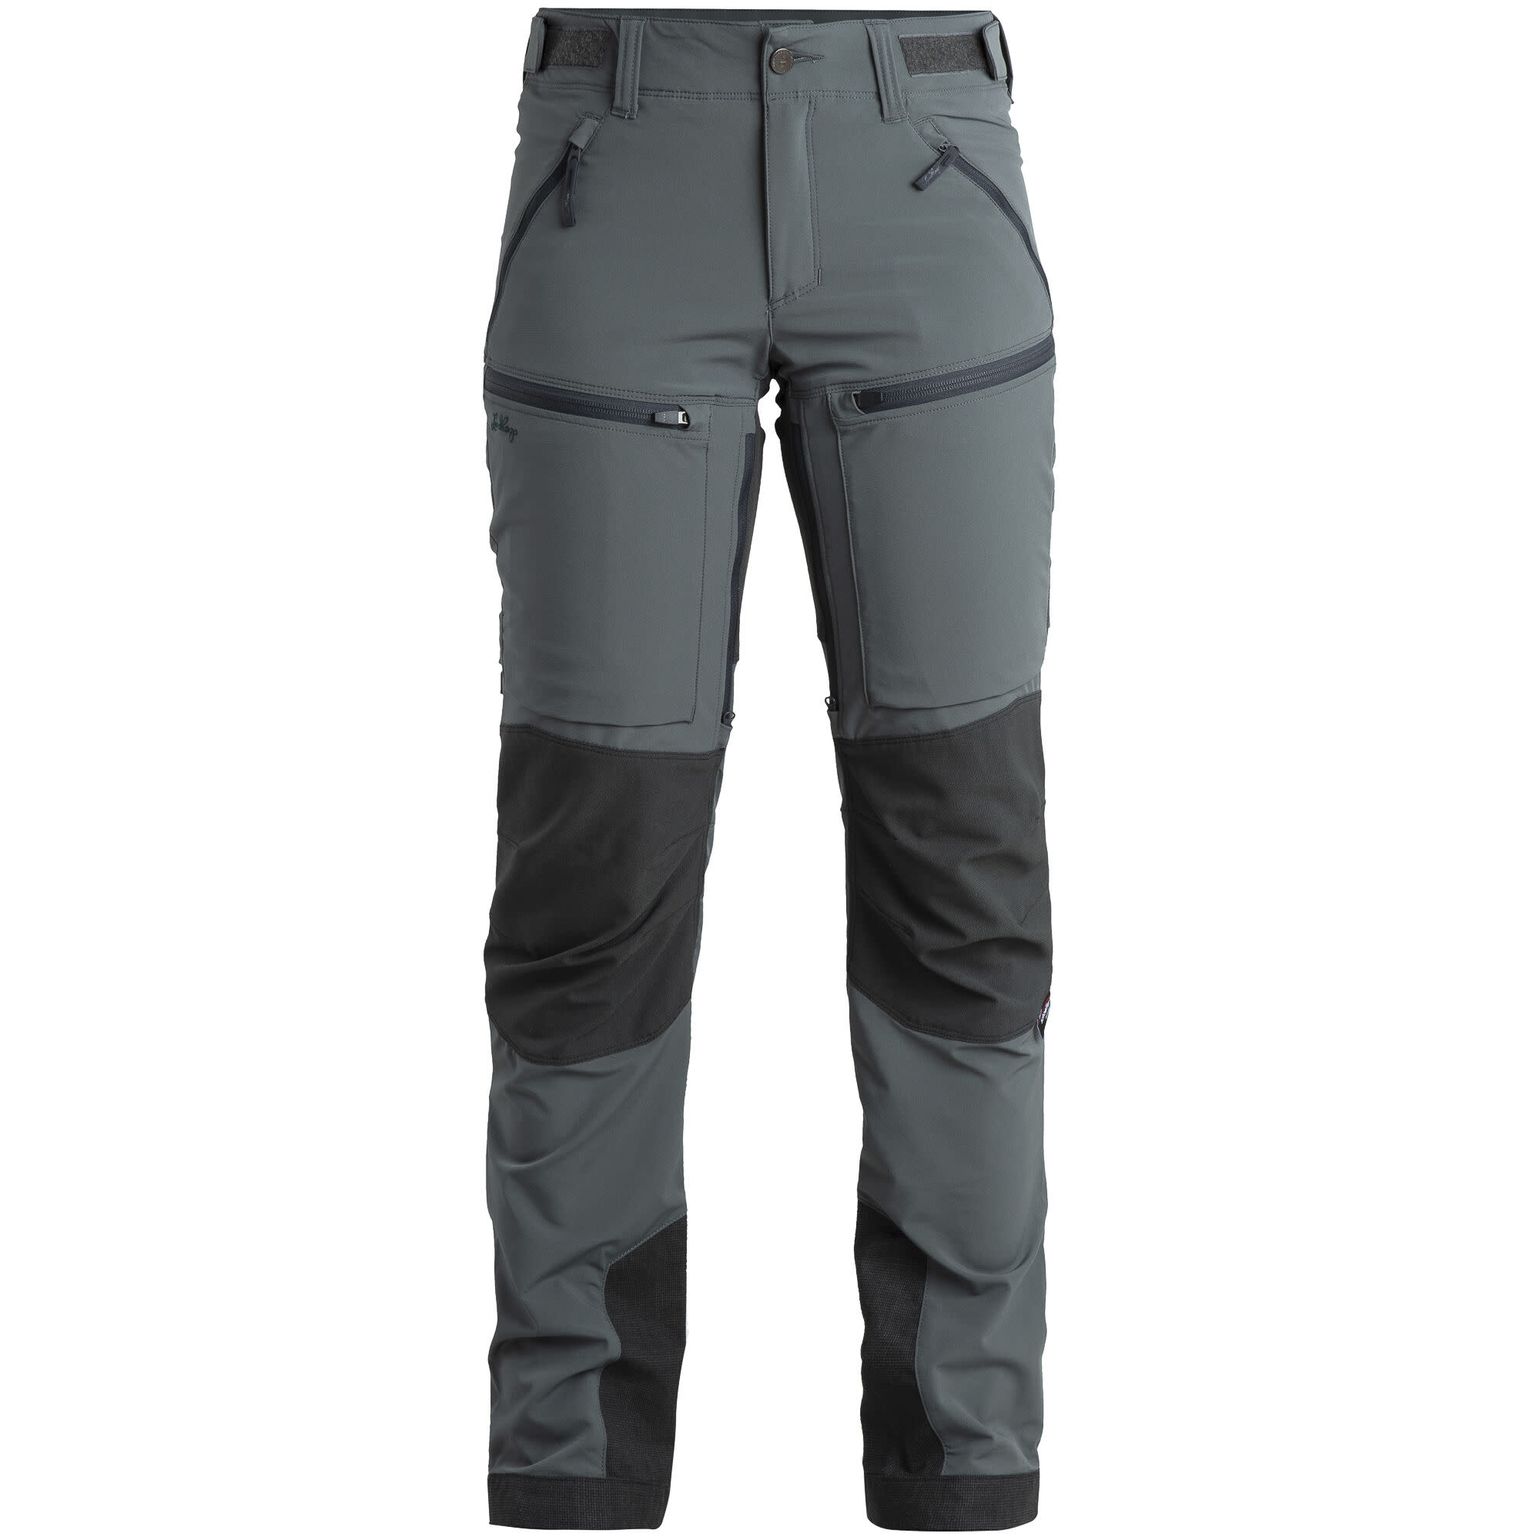 Lundhags Women's Askro Pro Pant Dark Agave/Charcoal